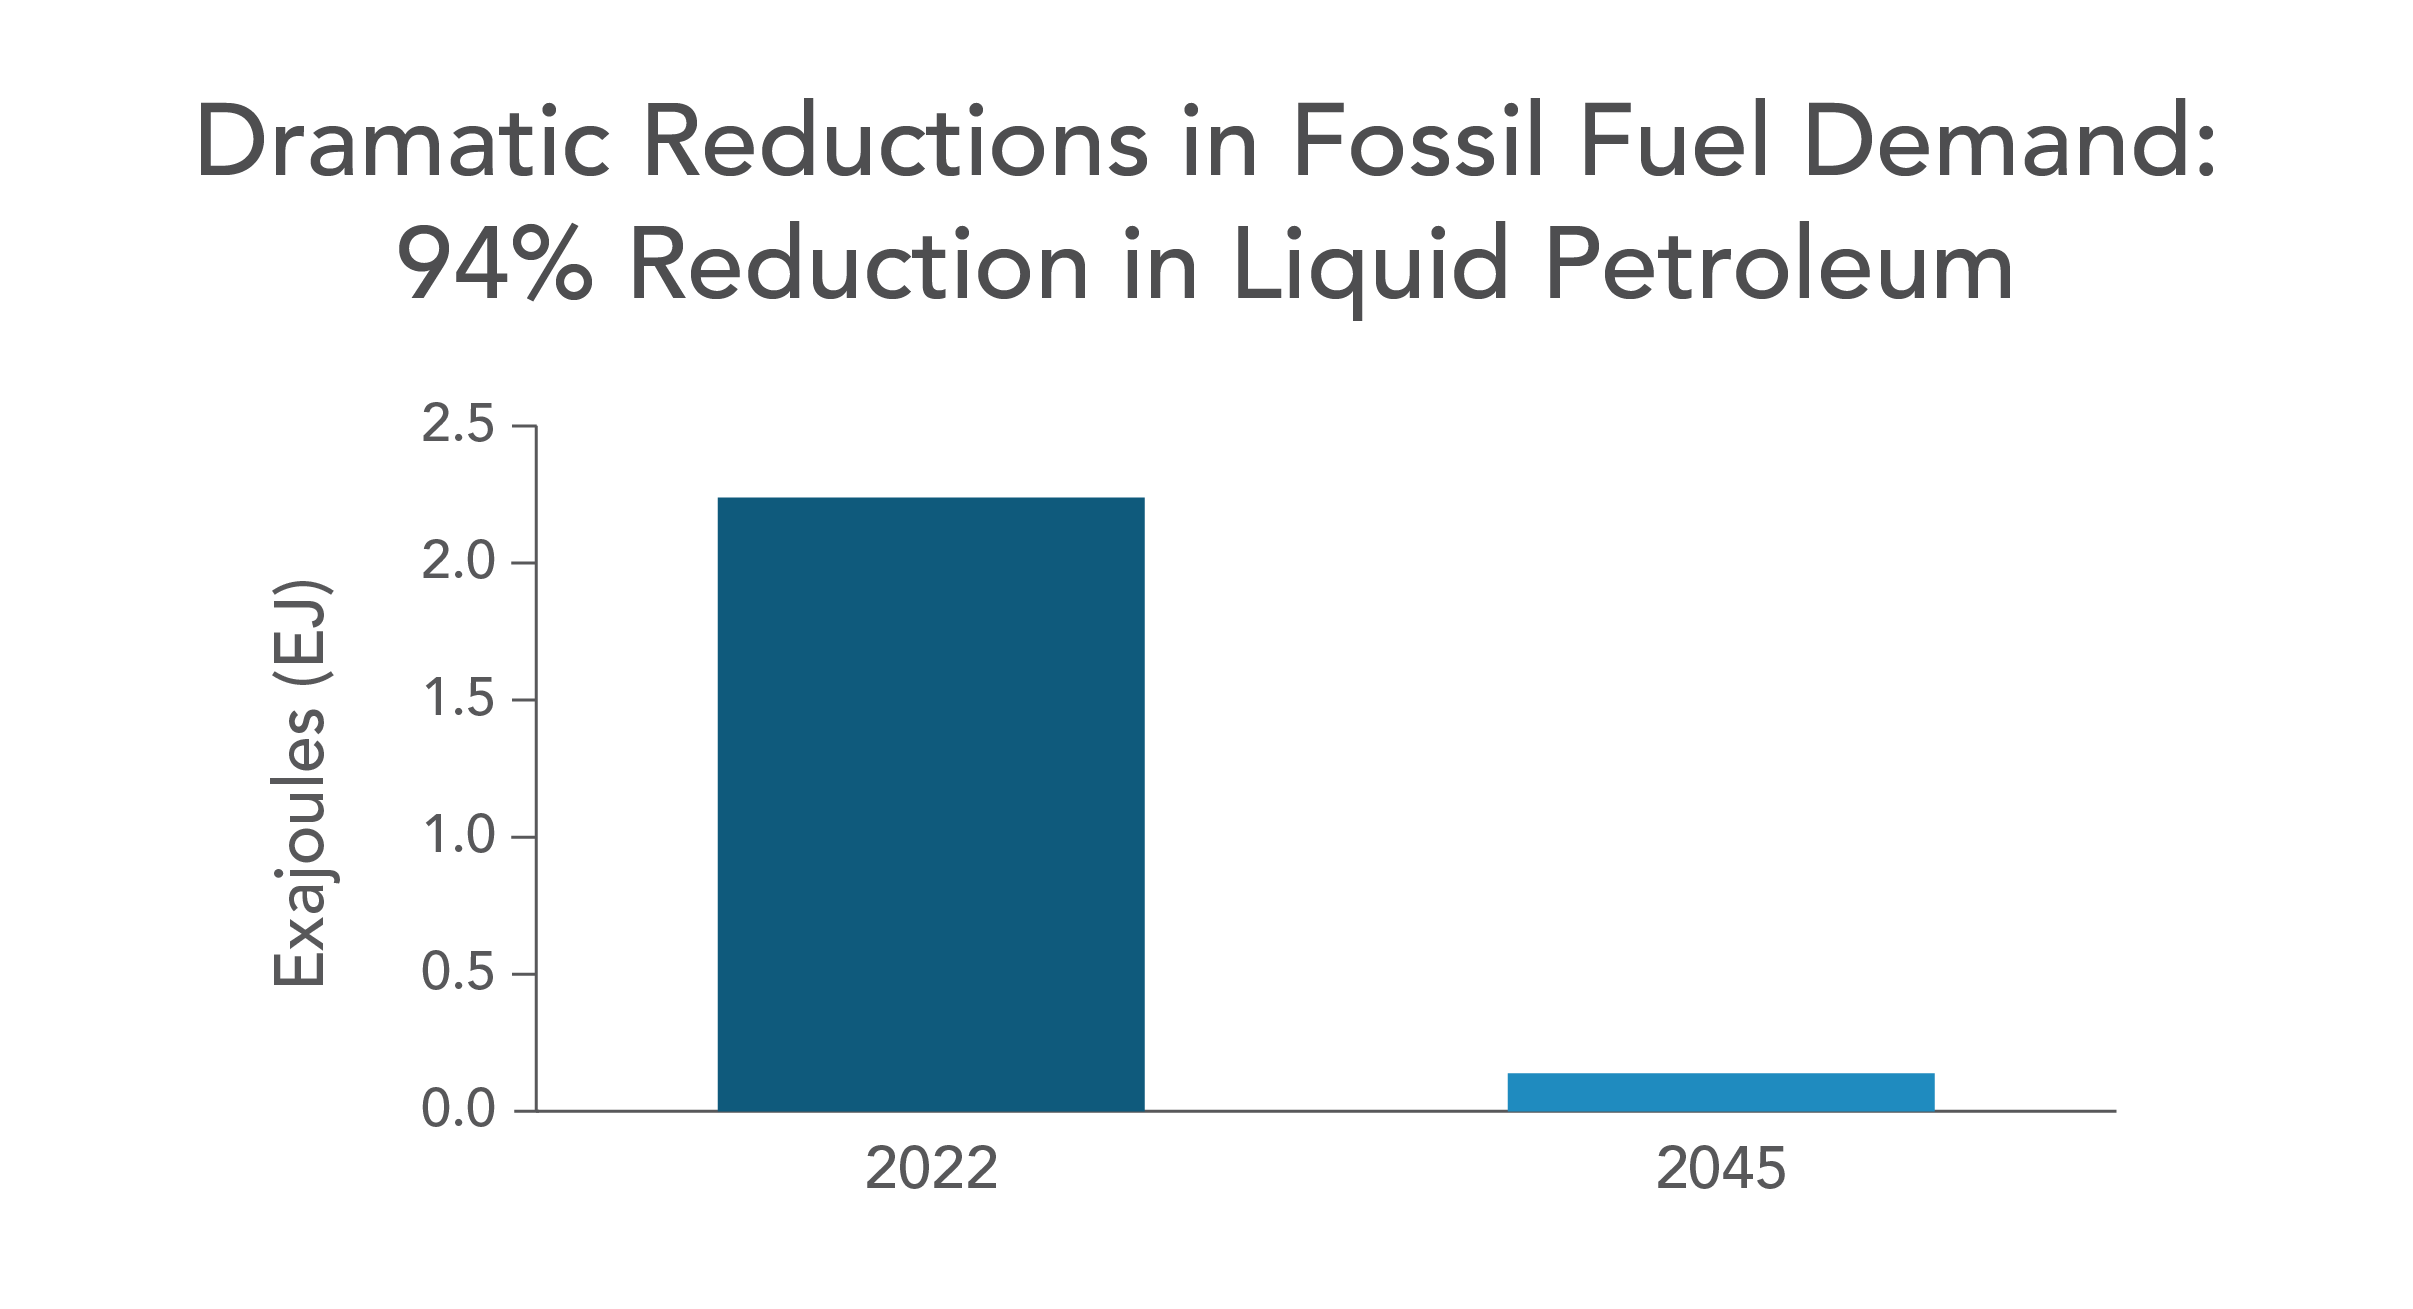 Dramatic reductions in fossil fuel demand: 94% reduction in liquid petroleum. bar chart showing the 94% drop between 2022 and 2045